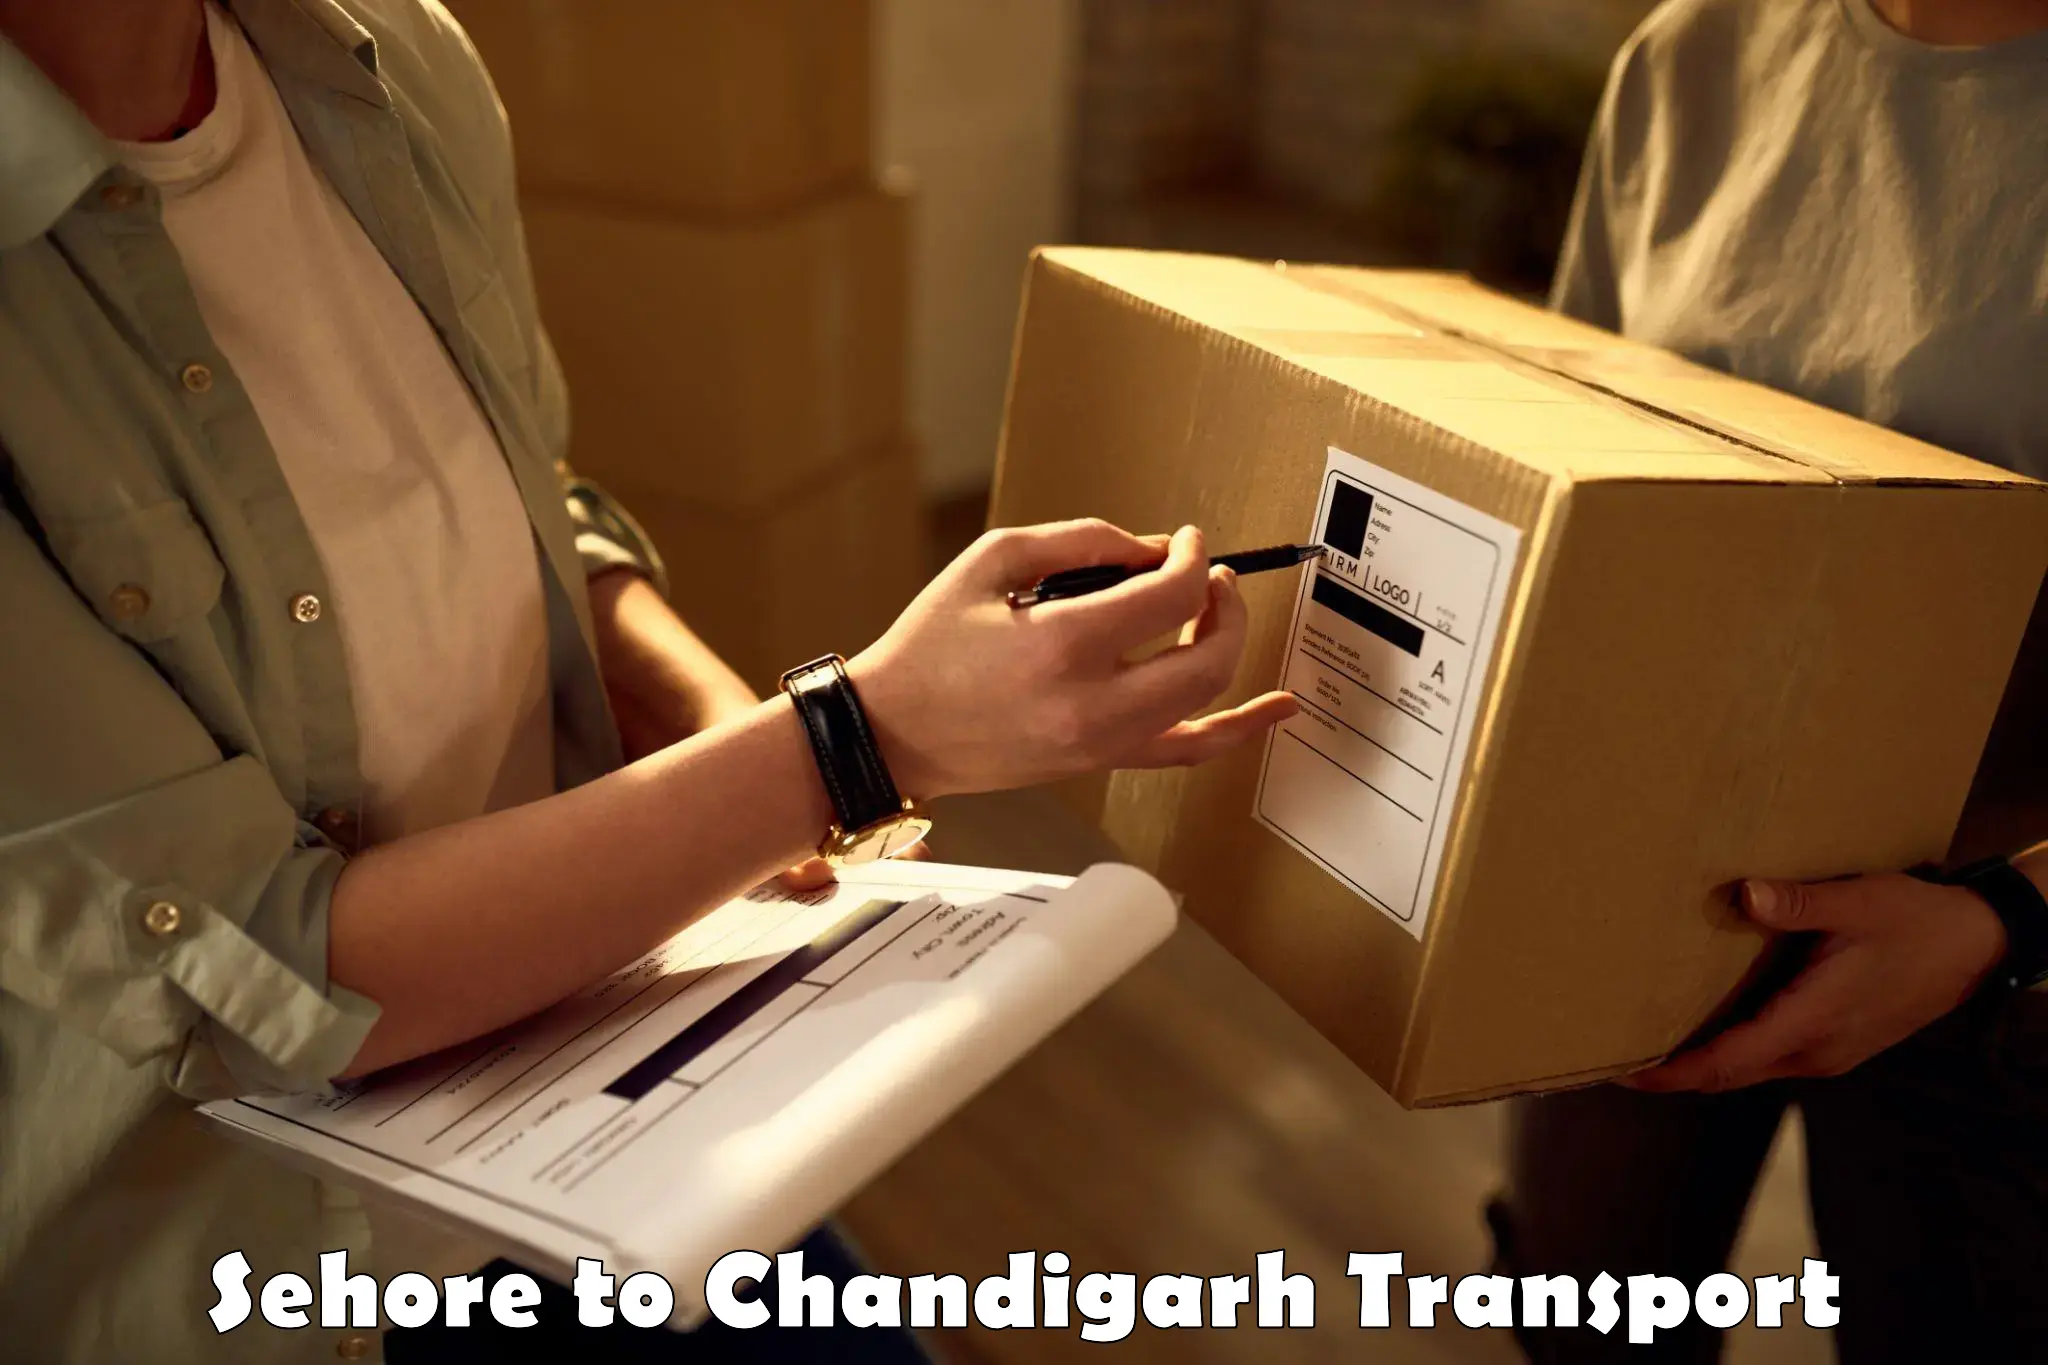 Commercial transport service Sehore to Chandigarh